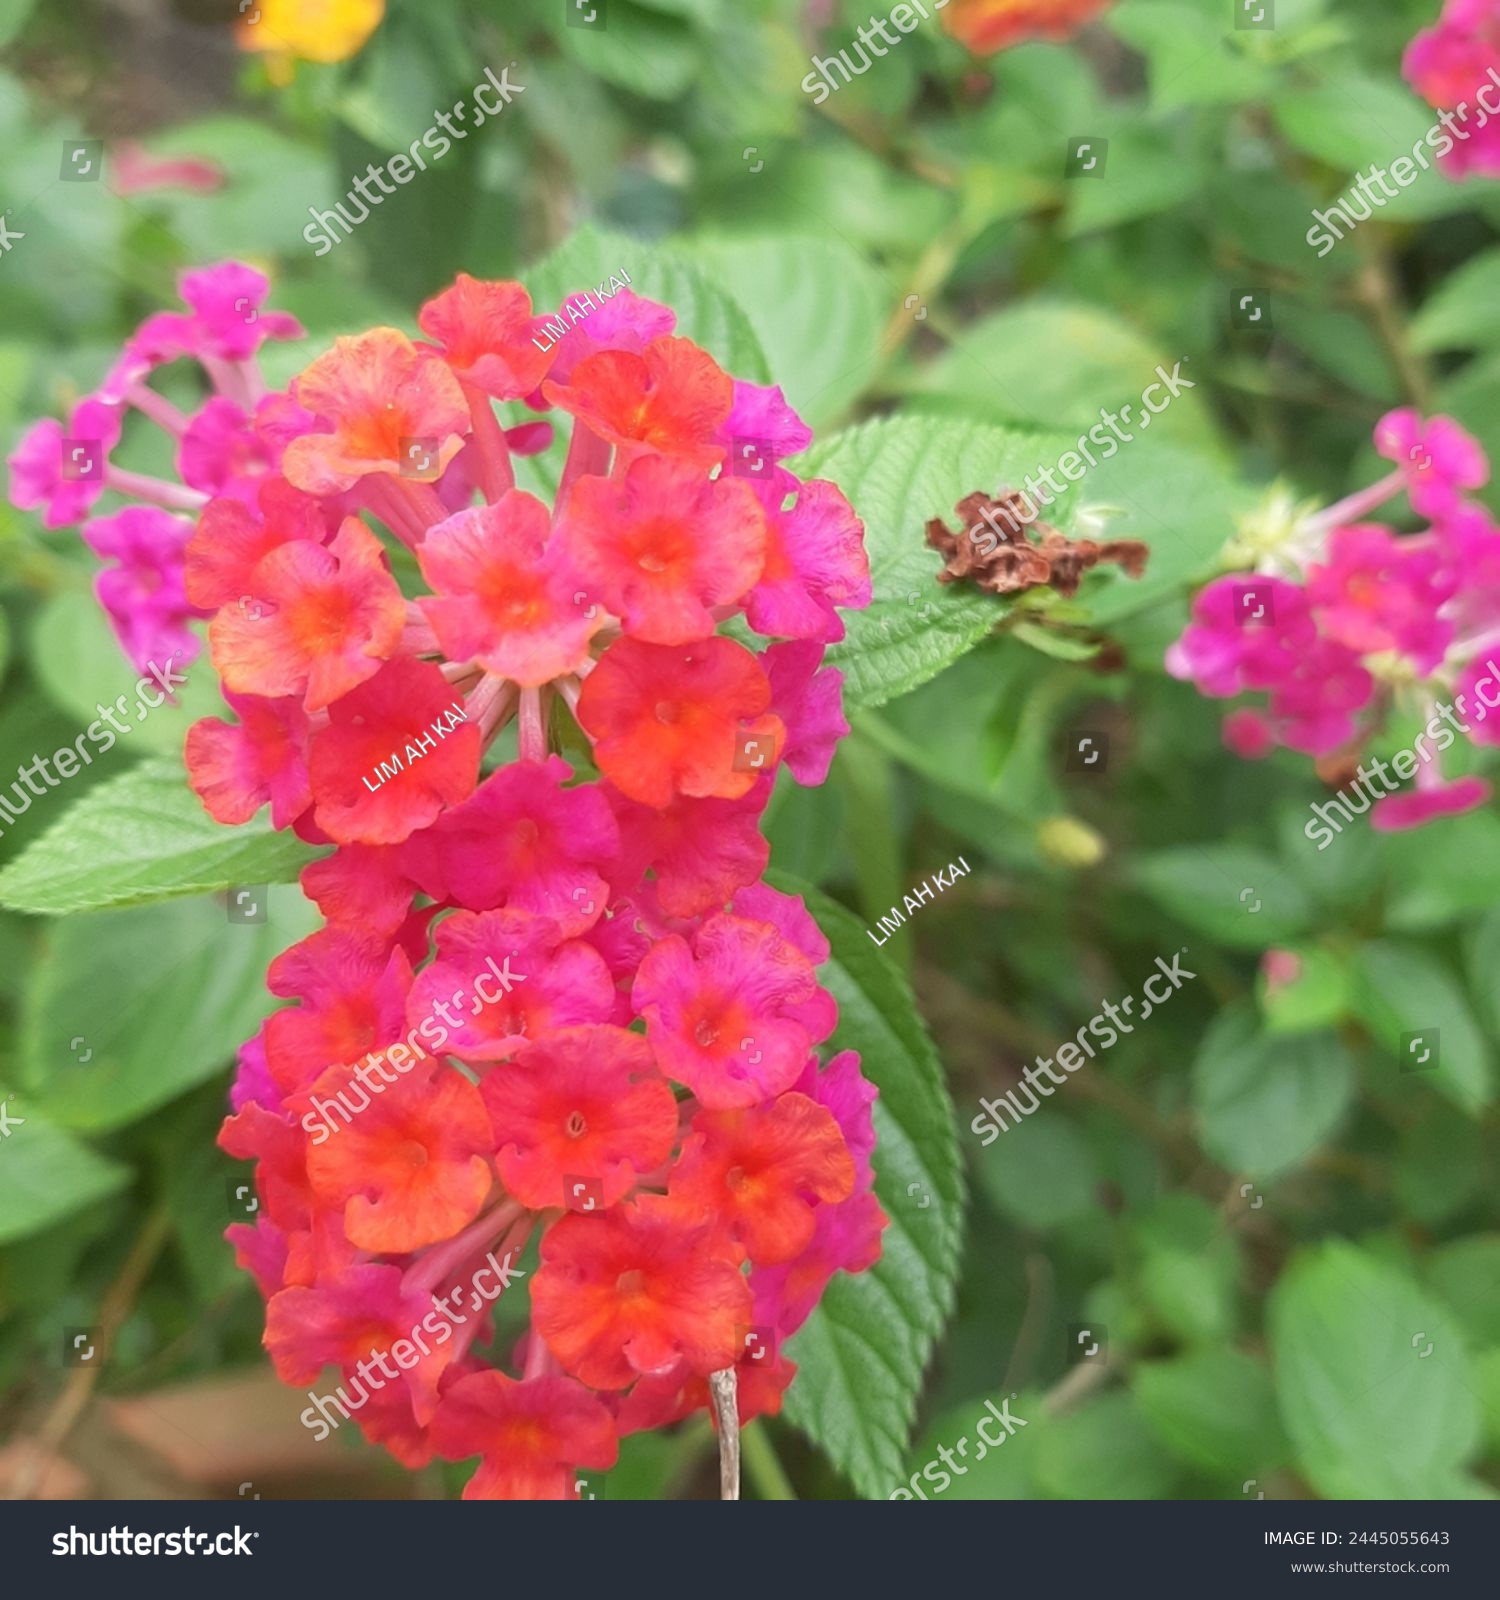 Lantana camara is a perennial, erect sprawling or scandent, shrub which typically grows to around 2 metres (6+1⁄2 feet) tall and form dense thickets in a variety of environments. Under  #2445055643